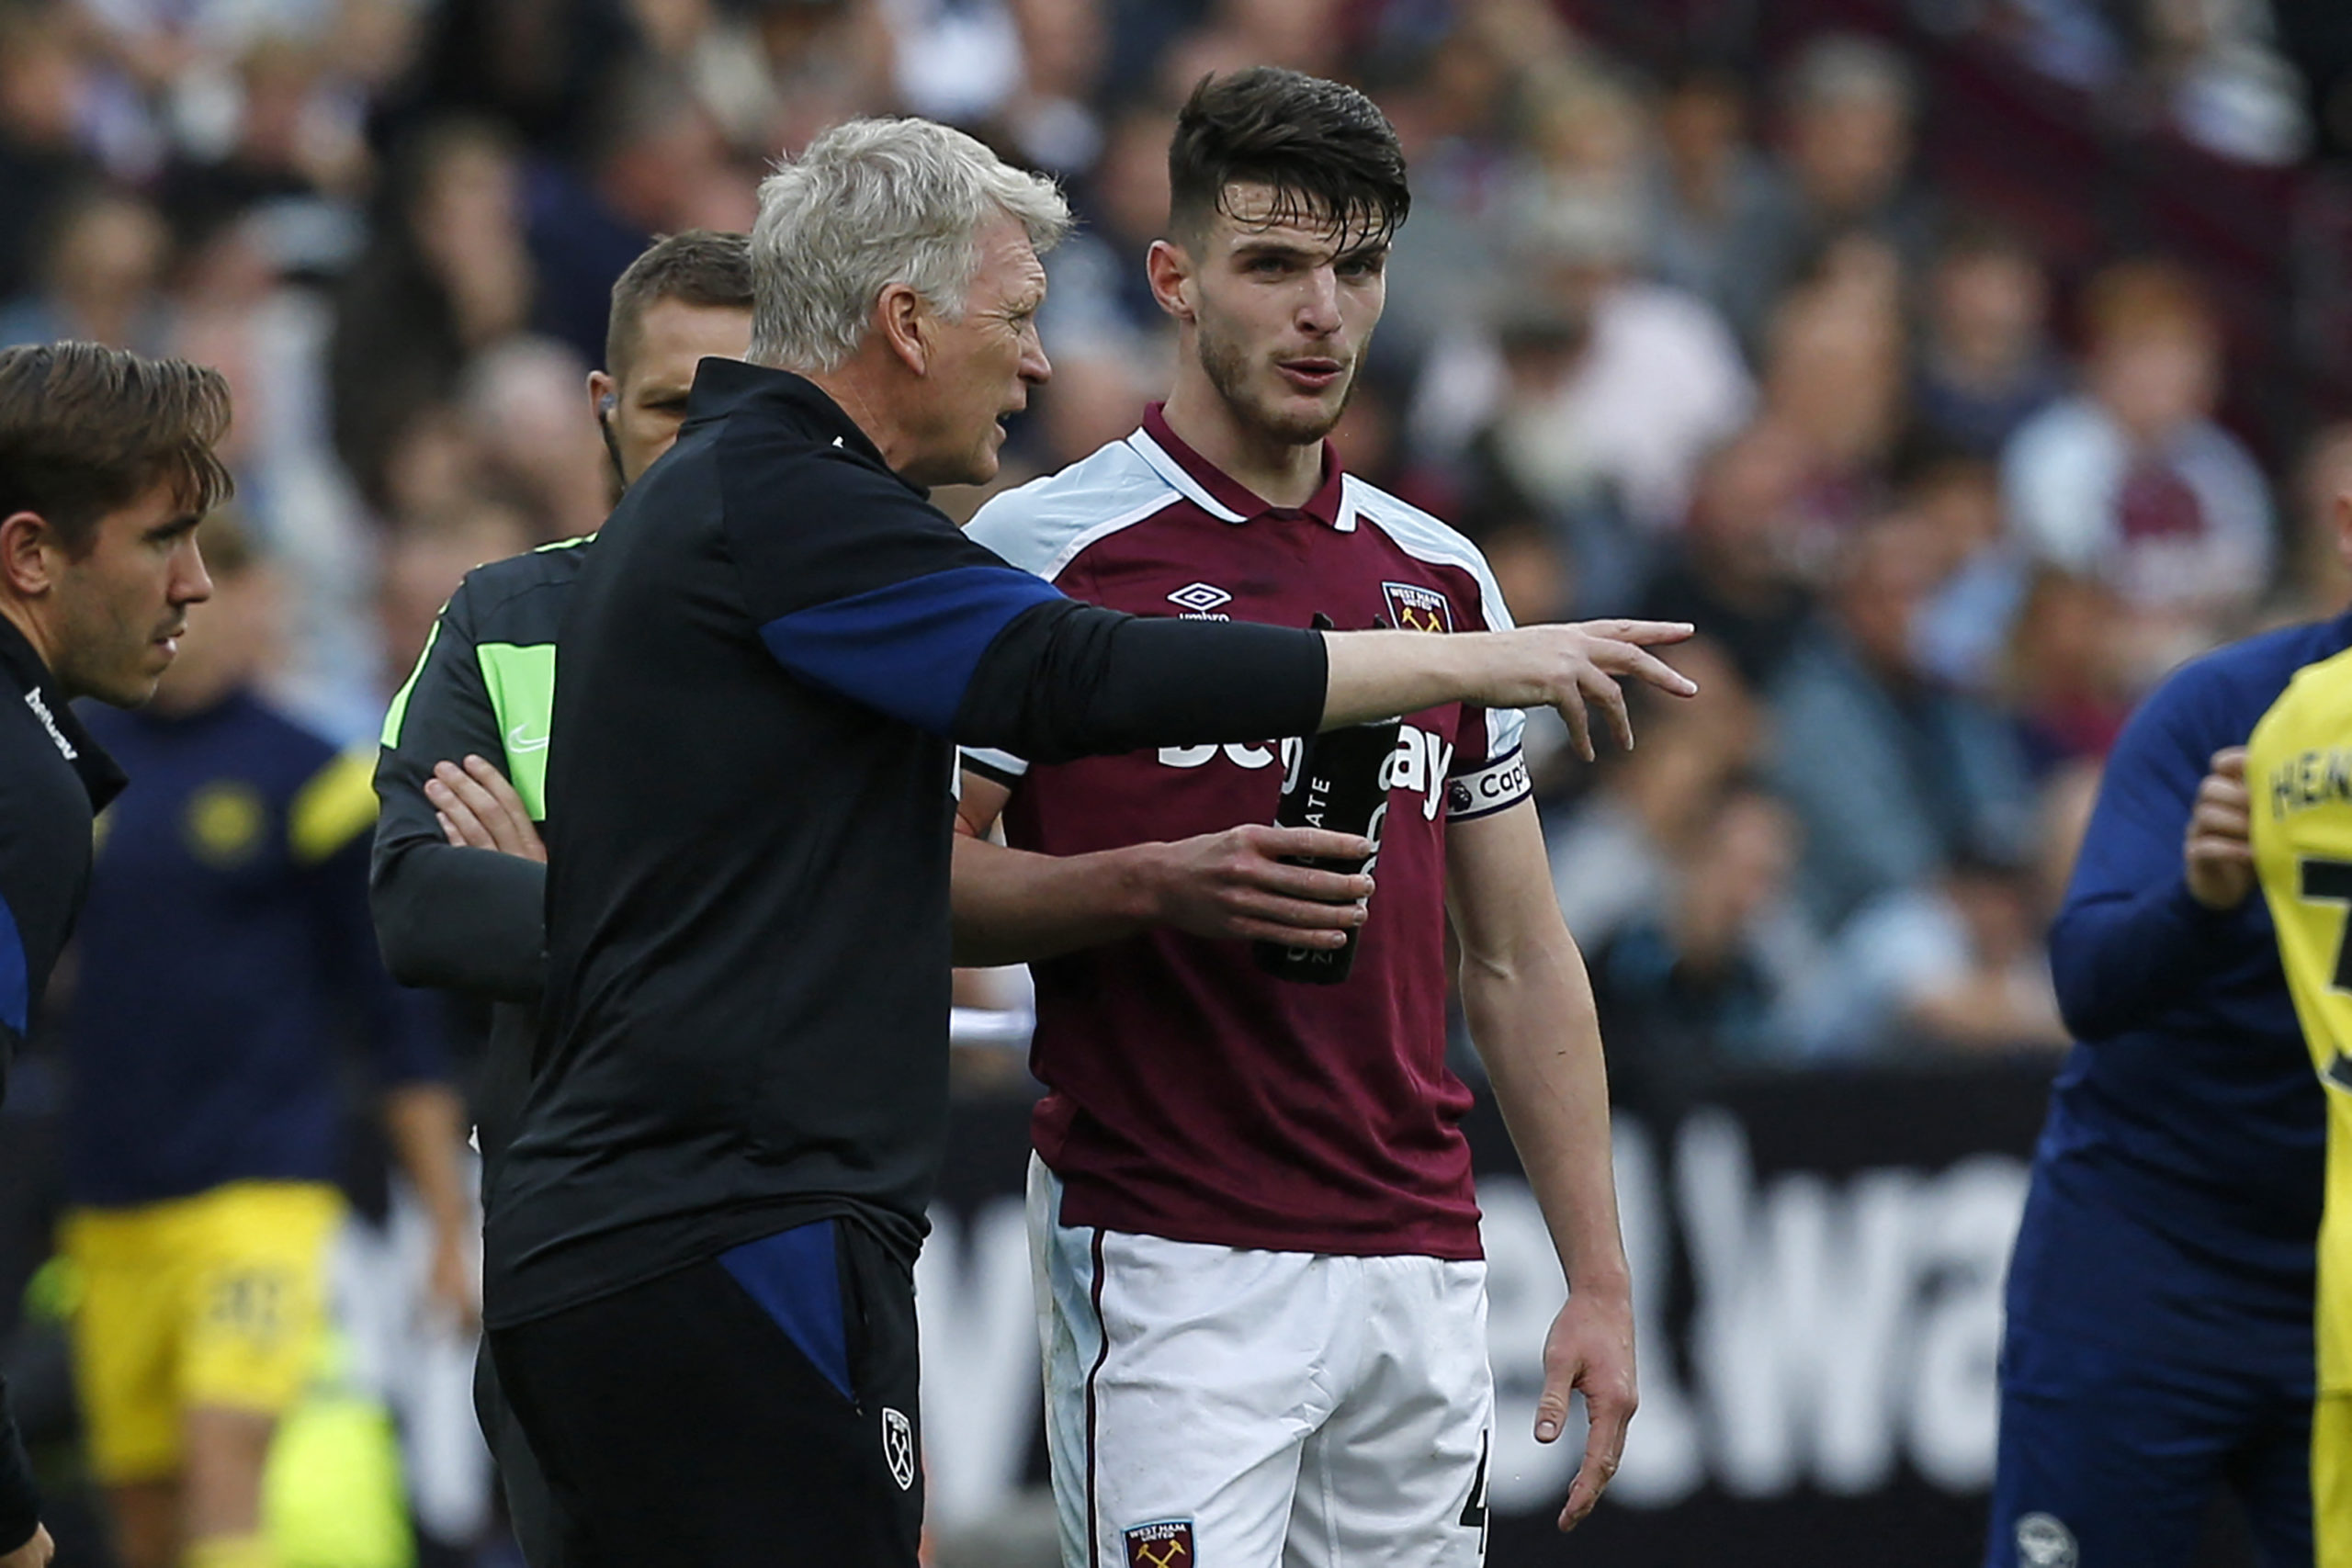 Star David Moyes allegedly wants to replace Declan Rice at West Ham suffers double fracture